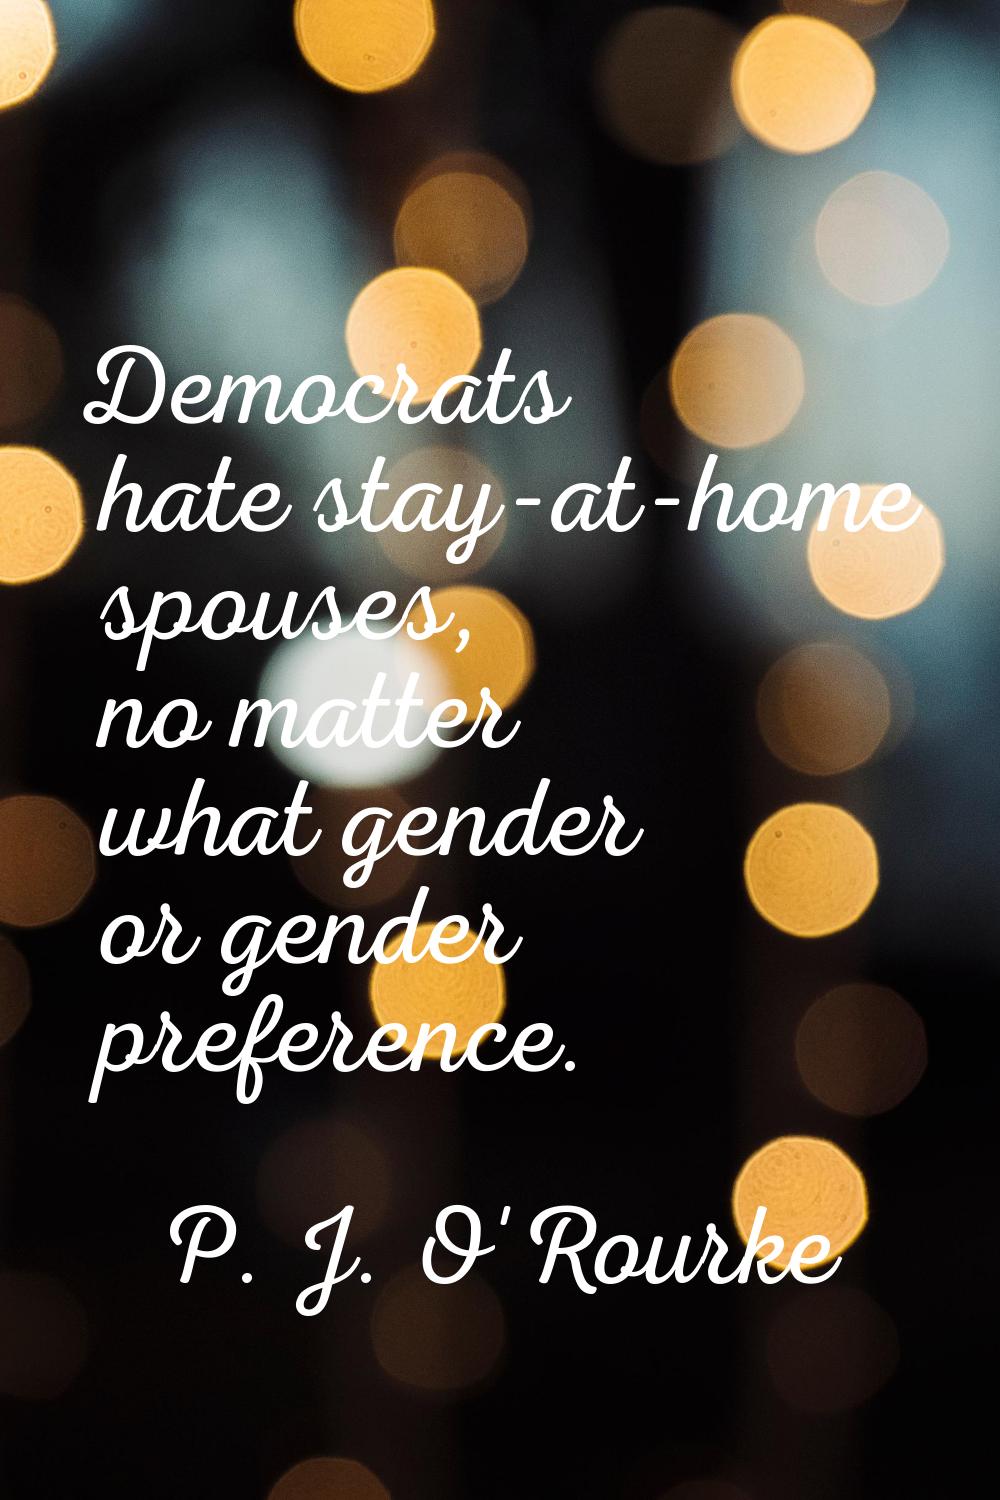 Democrats hate stay-at-home spouses, no matter what gender or gender preference.